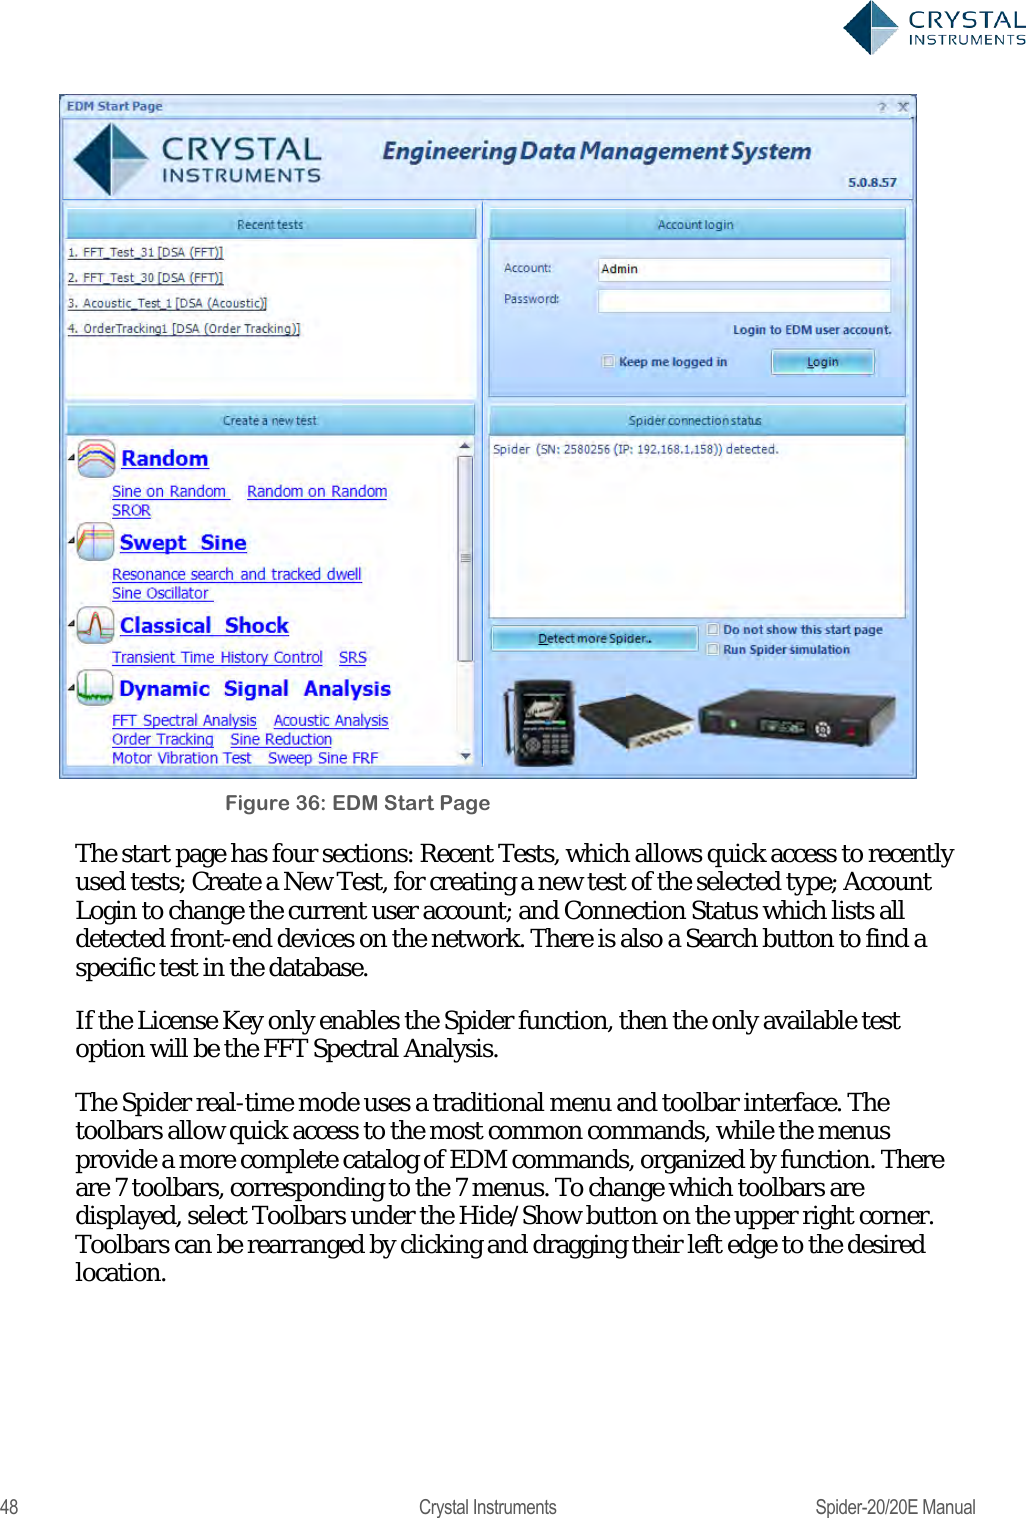  48  Crystal Instruments  Spider-20/20E Manual  Figure 36: EDM Start Page The start page has four sections: Recent Tests, which allows quick access to recently used tests; Create a New Test, for creating a new test of the selected type; Account Login to change the current user account; and Connection Status which lists all detected front-end devices on the network. There is also a Search button to find a specific test in the database. If the License Key only enables the Spider function, then the only available test option will be the FFT Spectral Analysis. The Spider real-time mode uses a traditional menu and toolbar interface. The toolbars allow quick access to the most common commands, while the menus provide a more complete catalog of EDM commands, organized by function. There are 7 toolbars, corresponding to the 7 menus. To change which toolbars are displayed, select Toolbars under the Hide/Show button on the upper right corner. Toolbars can be rearranged by clicking and dragging their left edge to the desired location. 